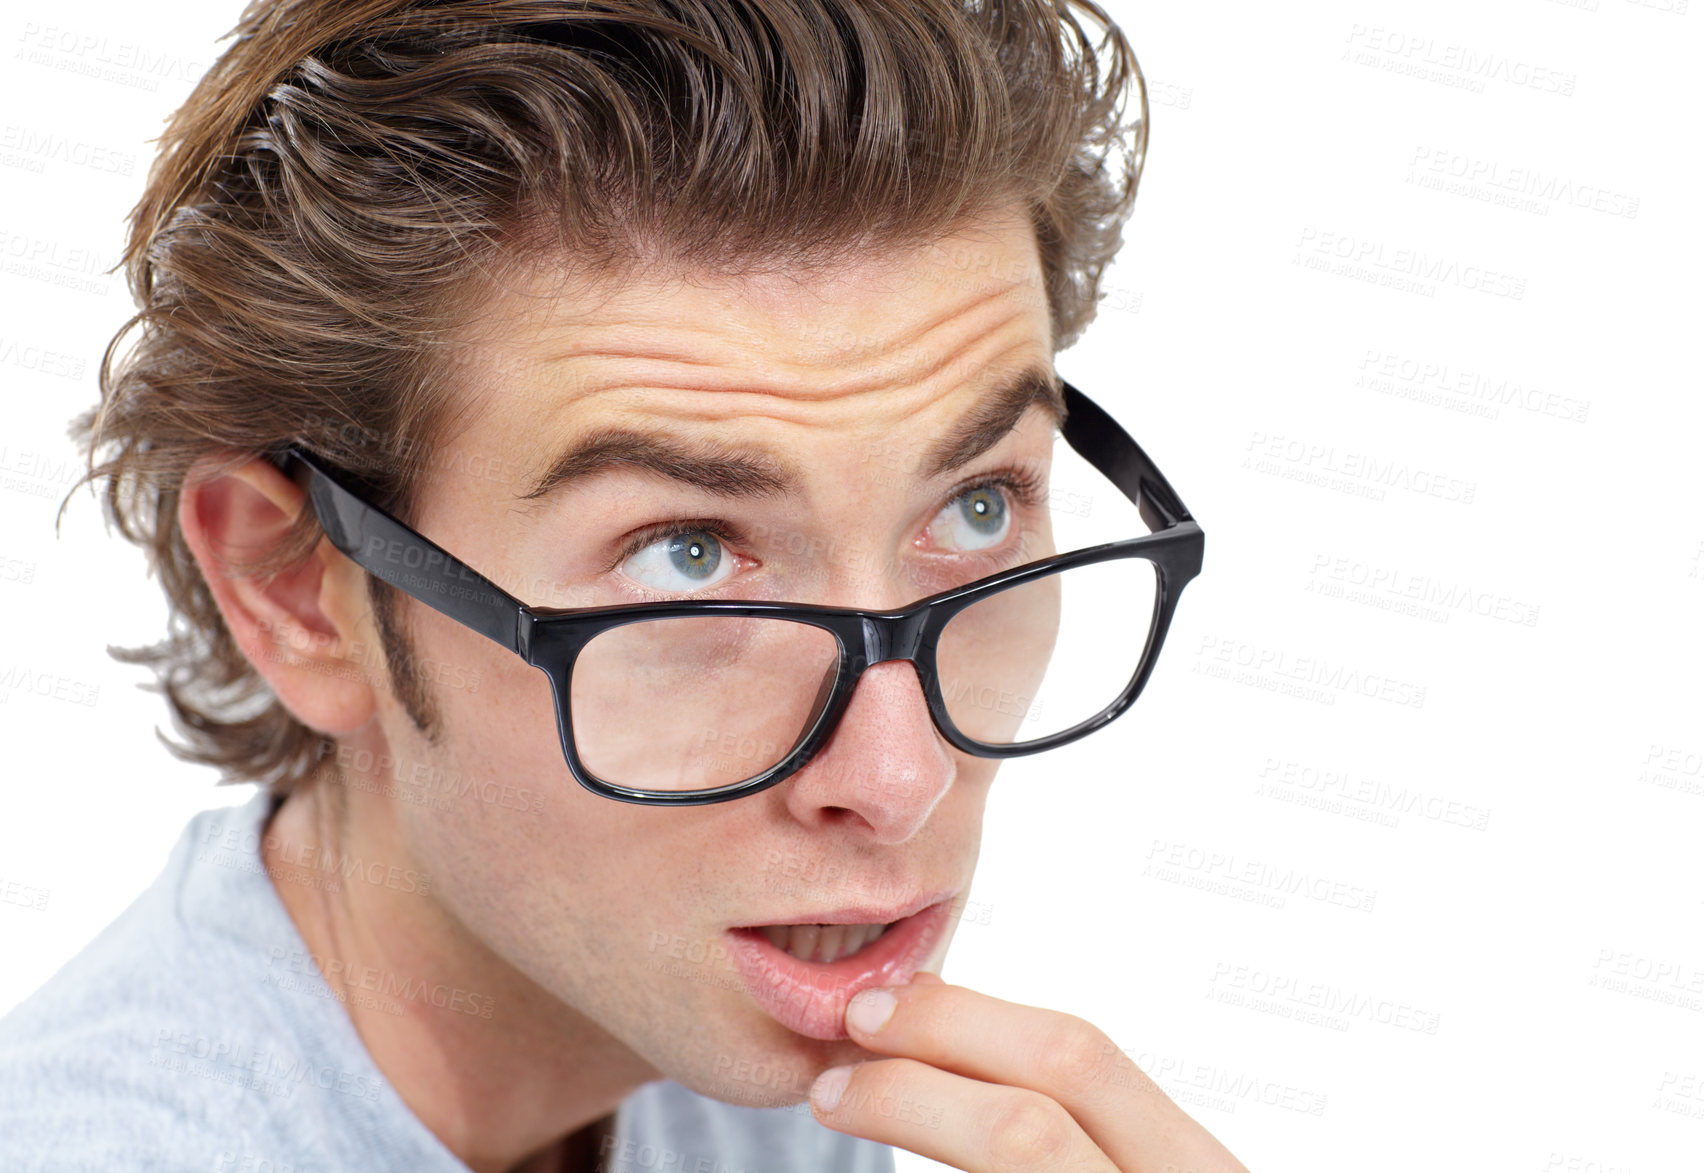 Buy stock photo Young man wearing glasses touching his lip and looking pensive